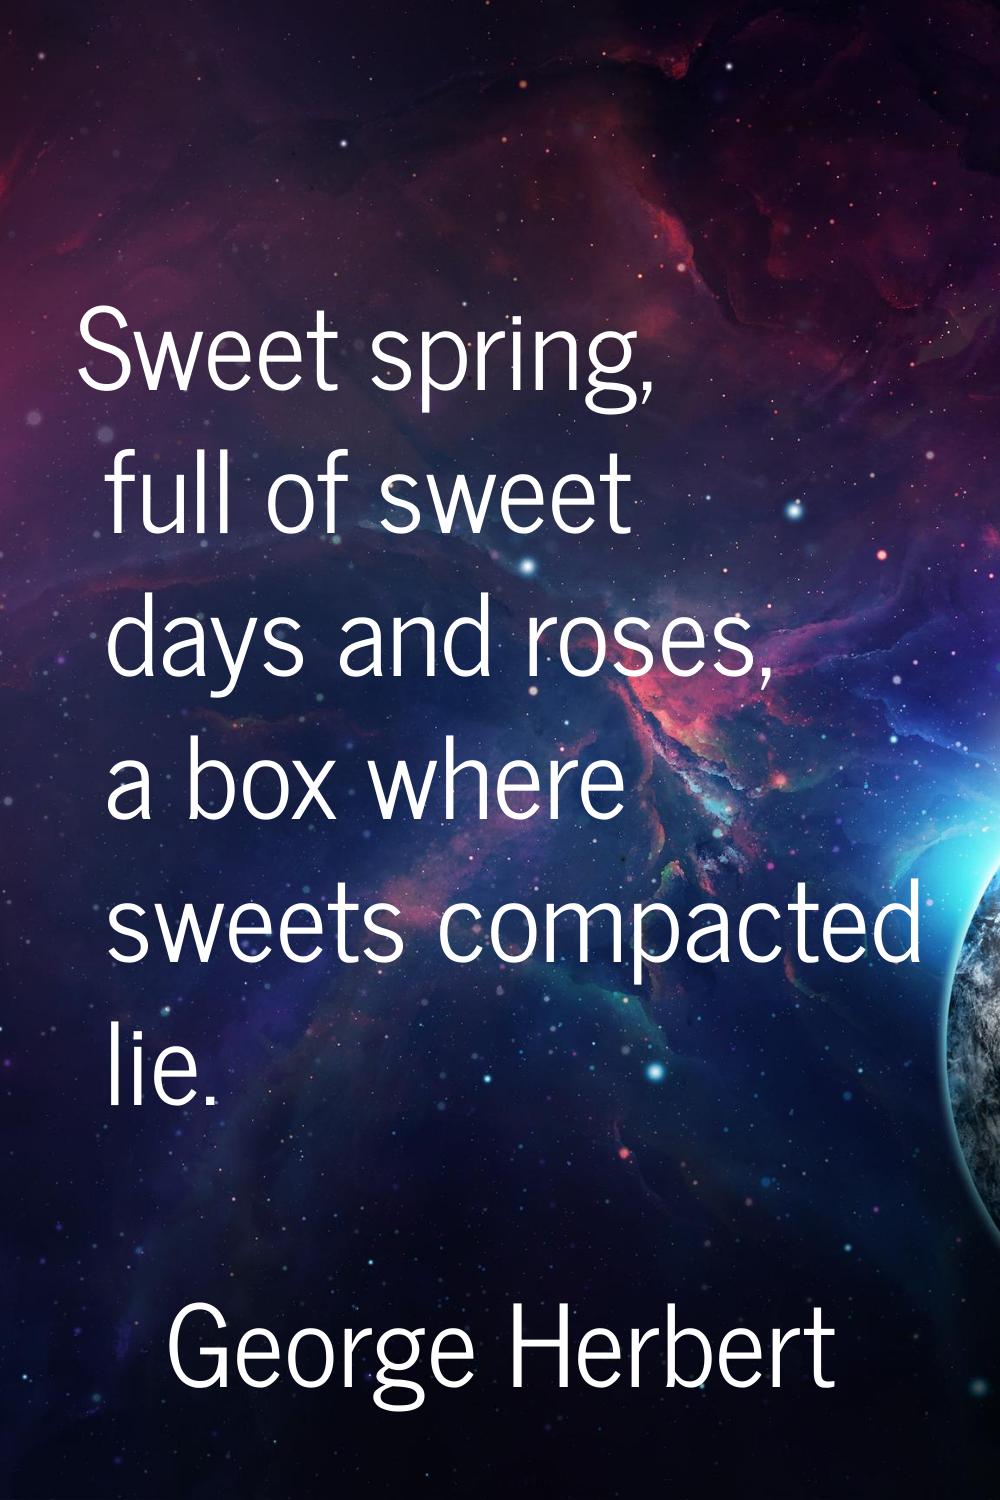 Sweet spring, full of sweet days and roses, a box where sweets compacted lie.